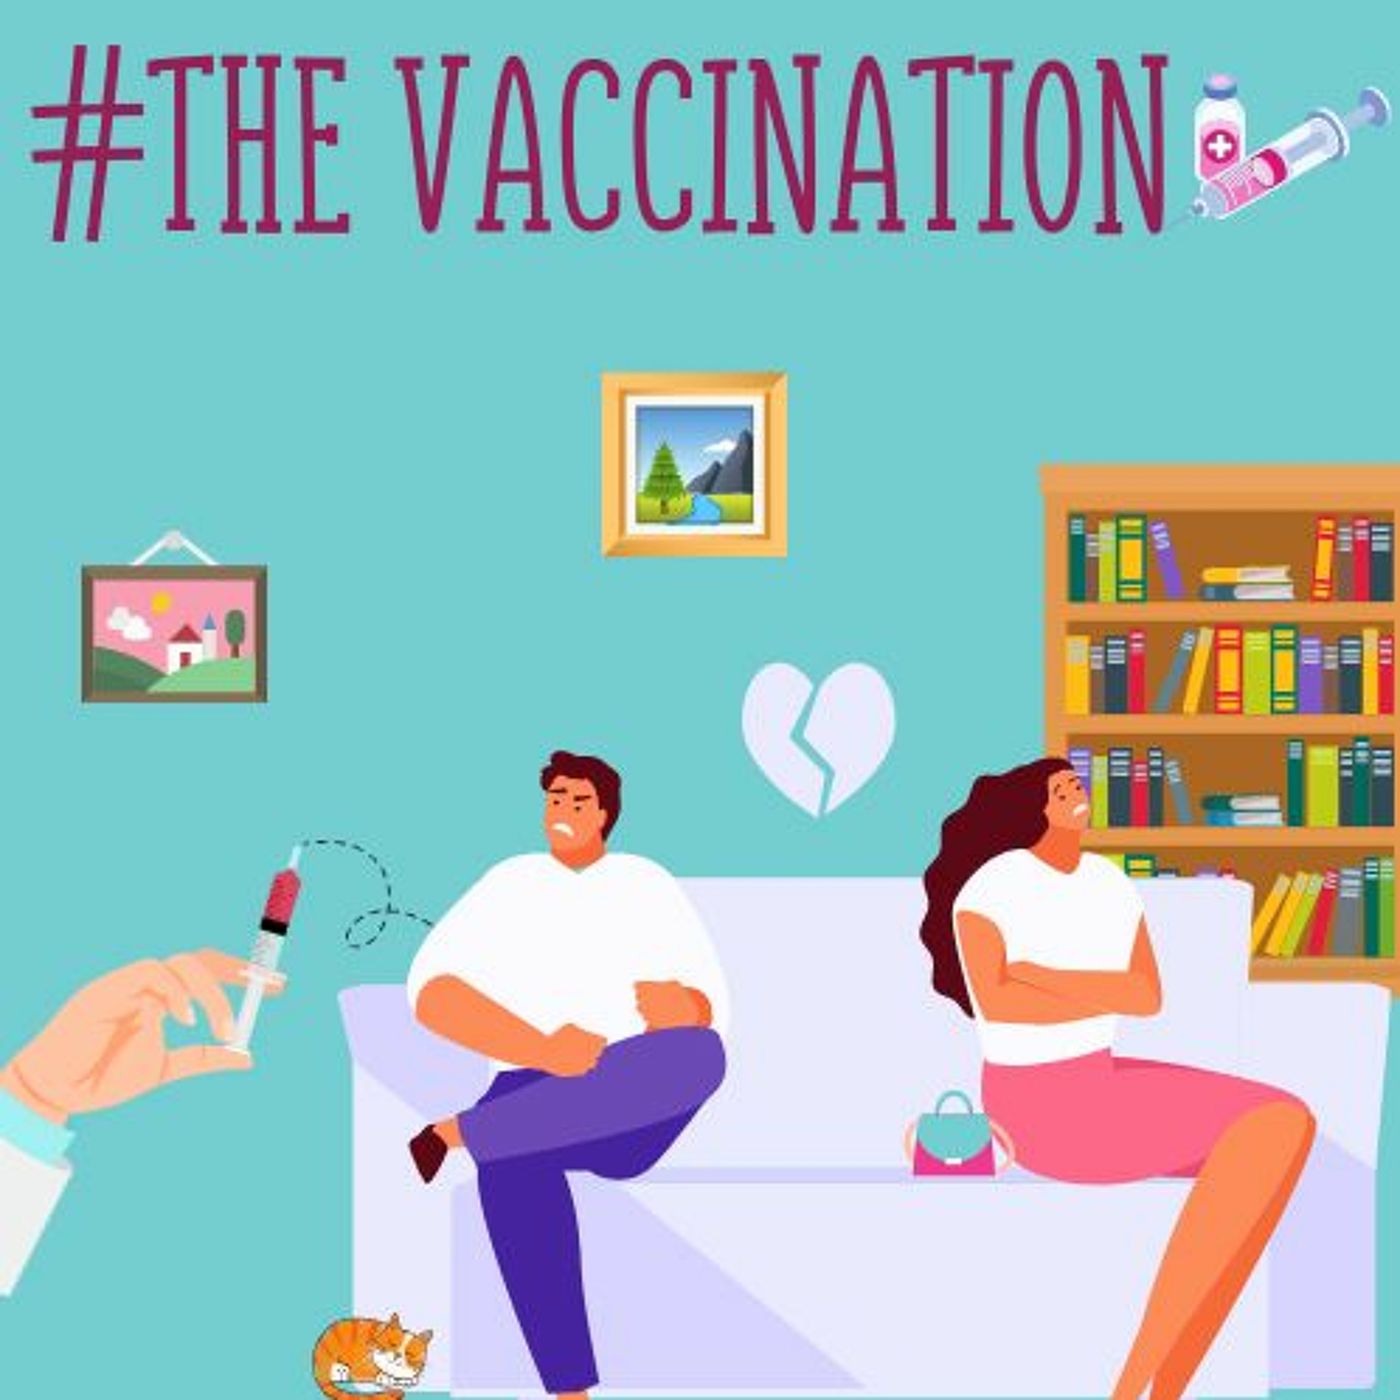 #THE VACCINATION!